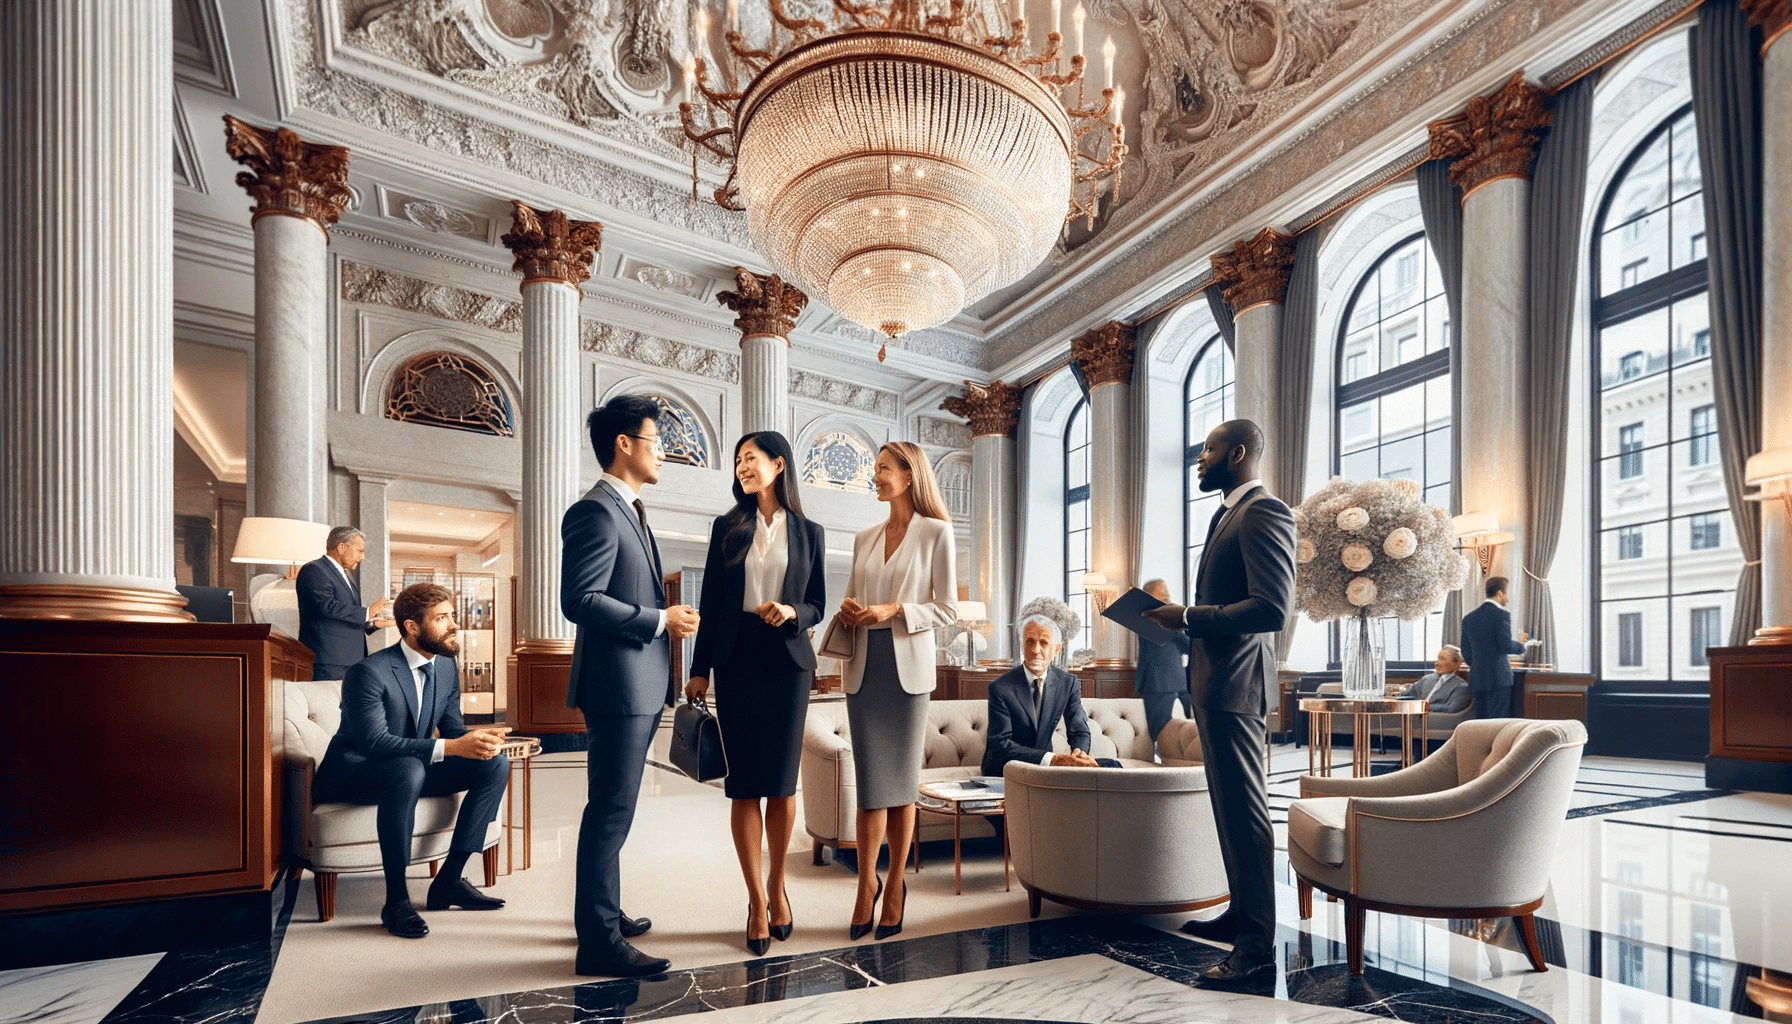 A Group Of People Waiting In The Lobby Of A Swiss Bank